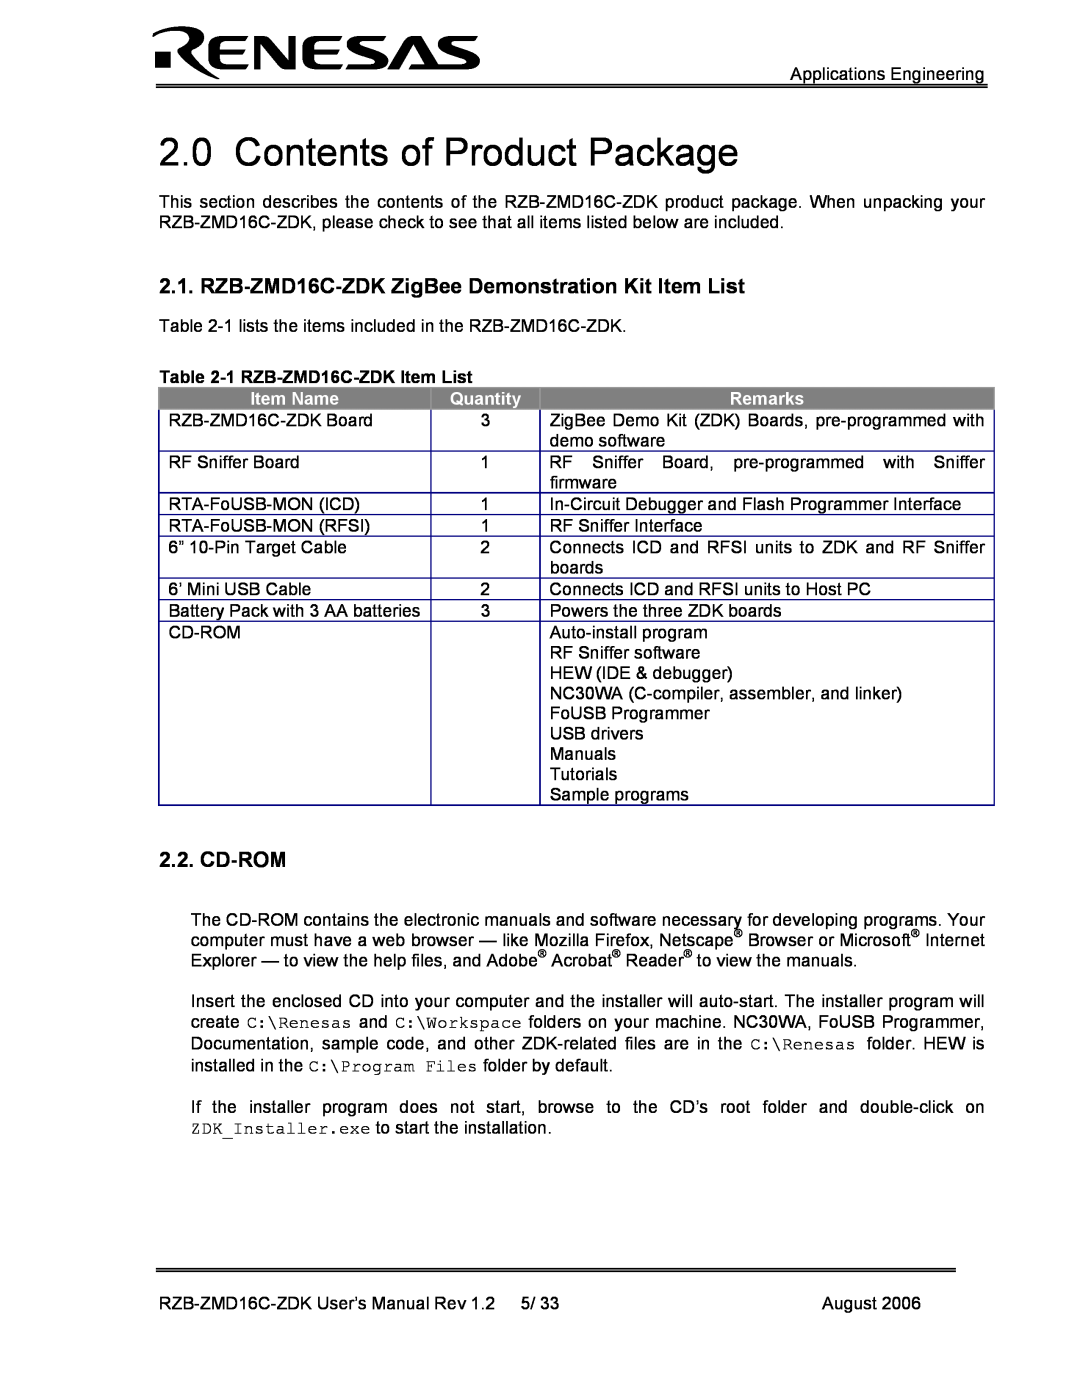 Renesas RZB-ZMD16C-ZDK user manual Contents of Product Package, Cd-Rom, Item Name, Quantity, Remarks 